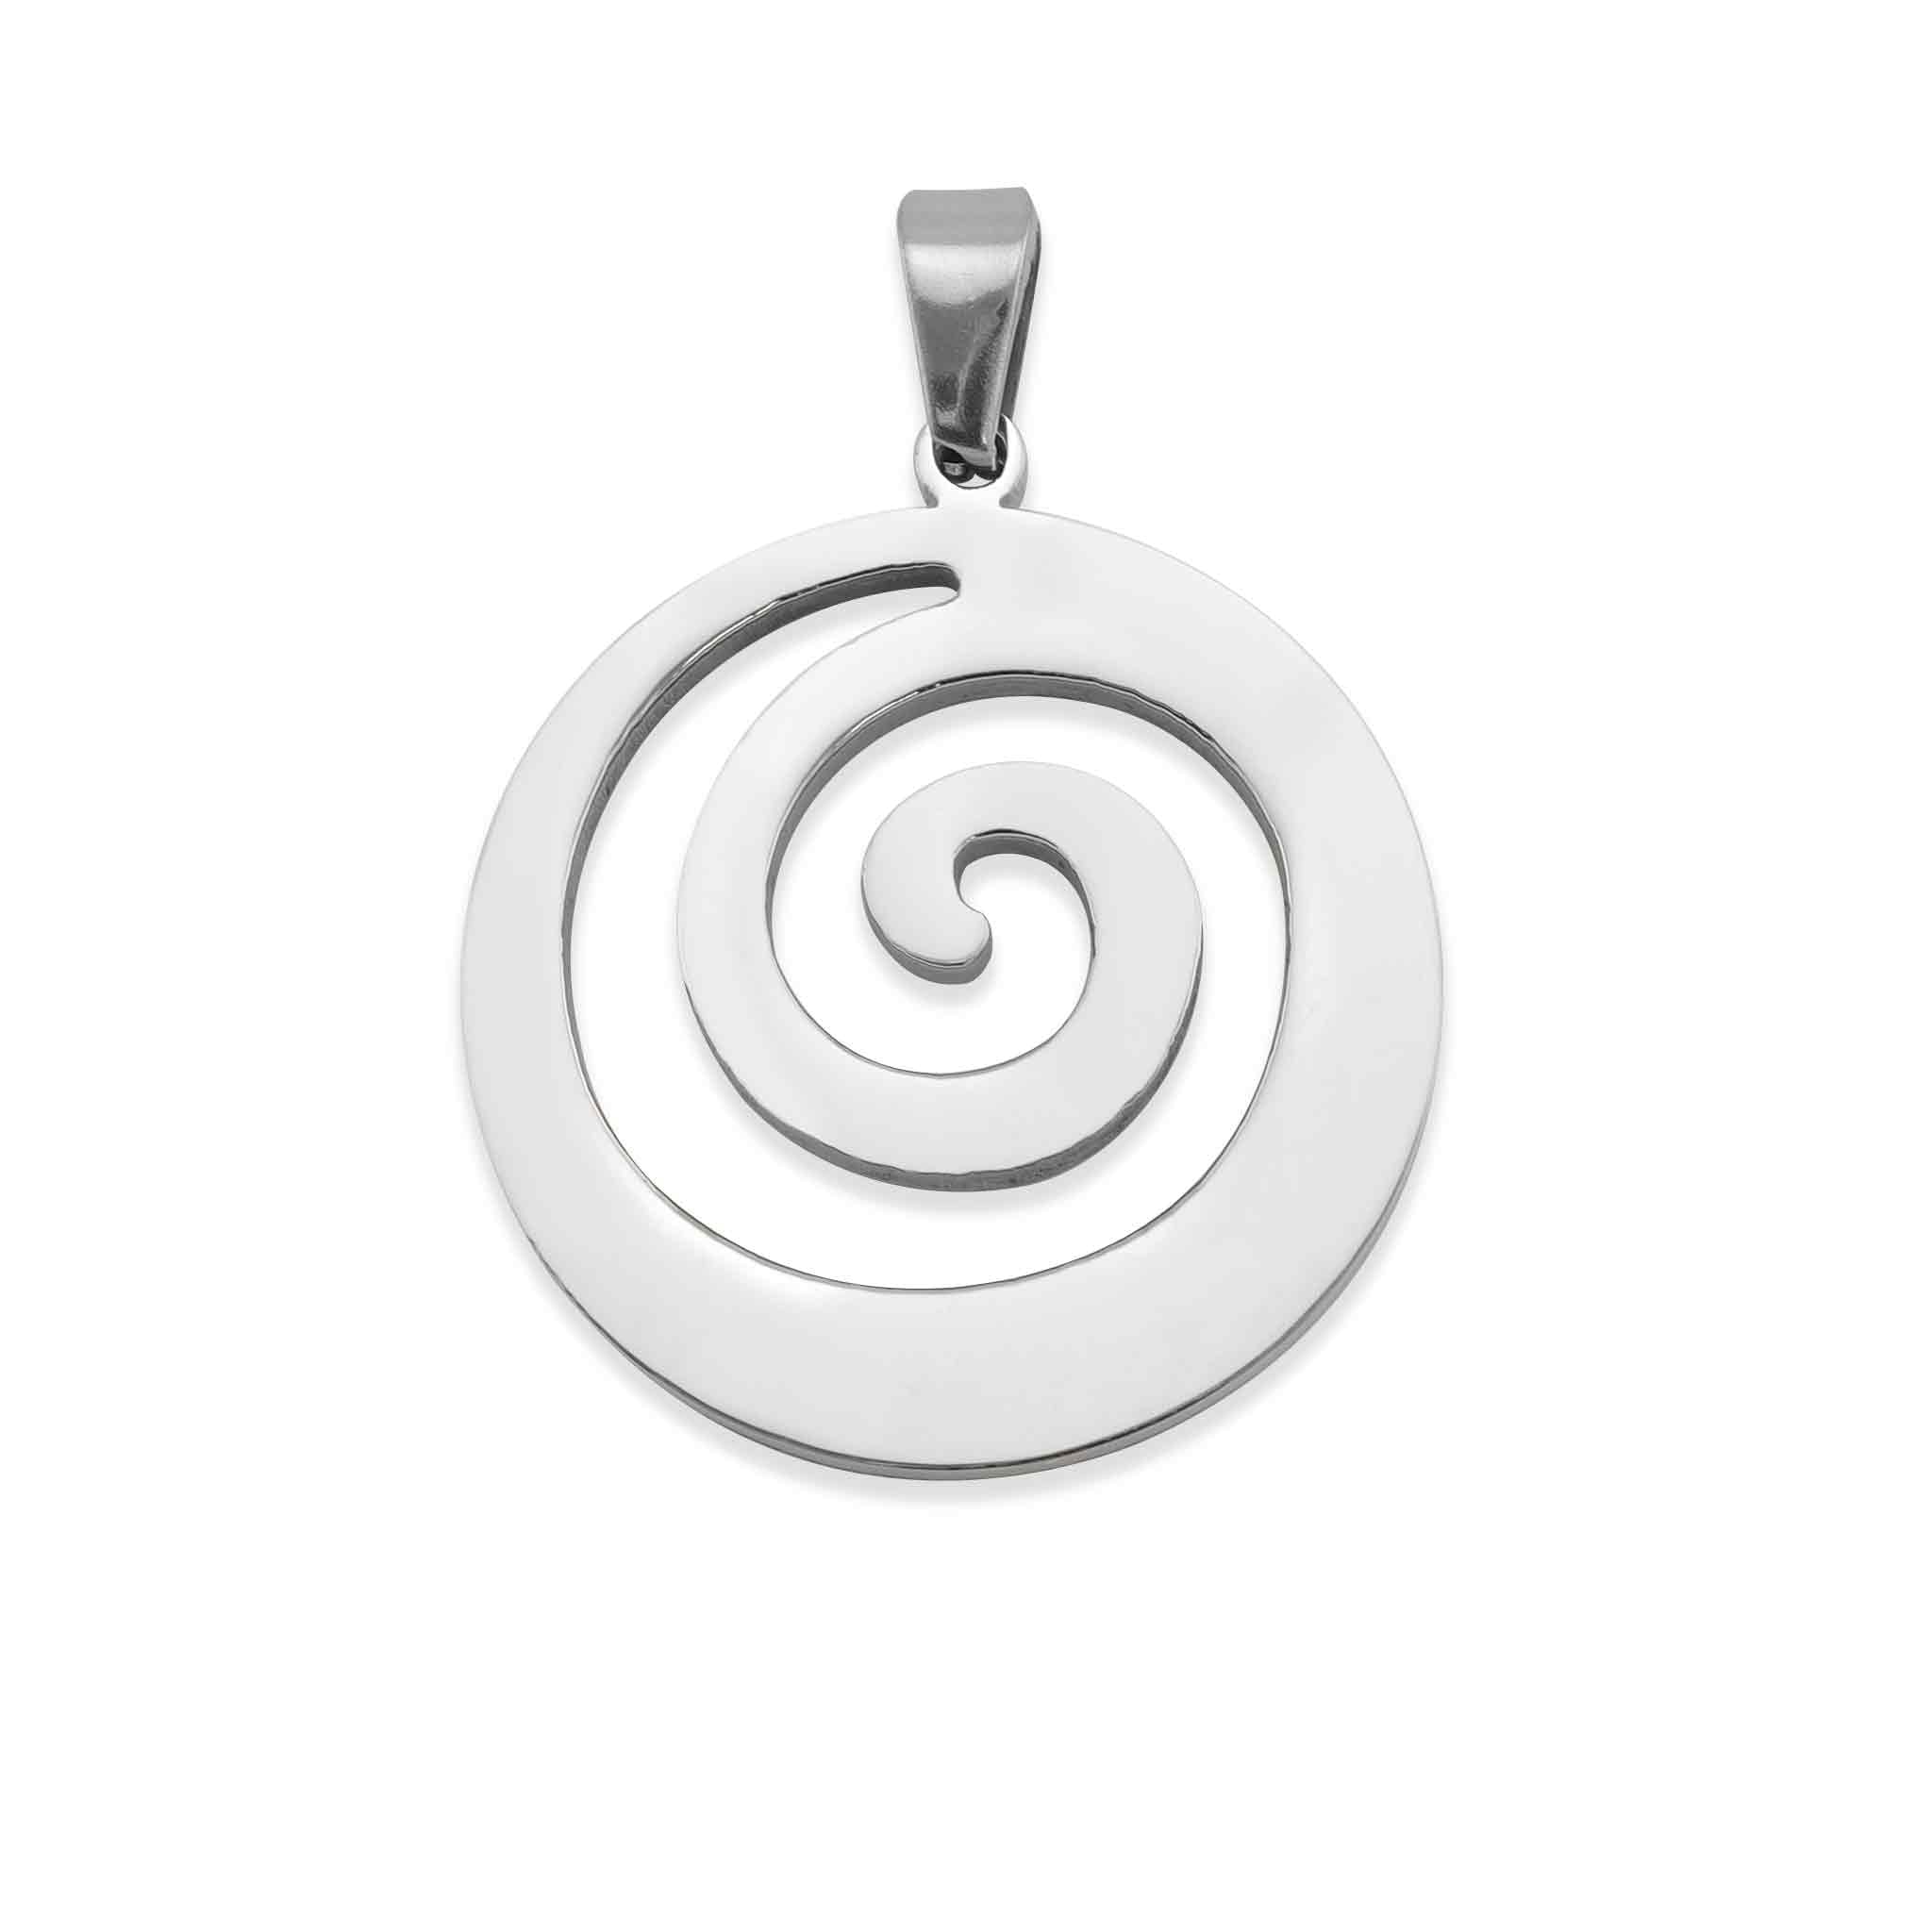 18K Gold PVD Polished Stainless Steel Swirl Cutout Pendant / SBB0040